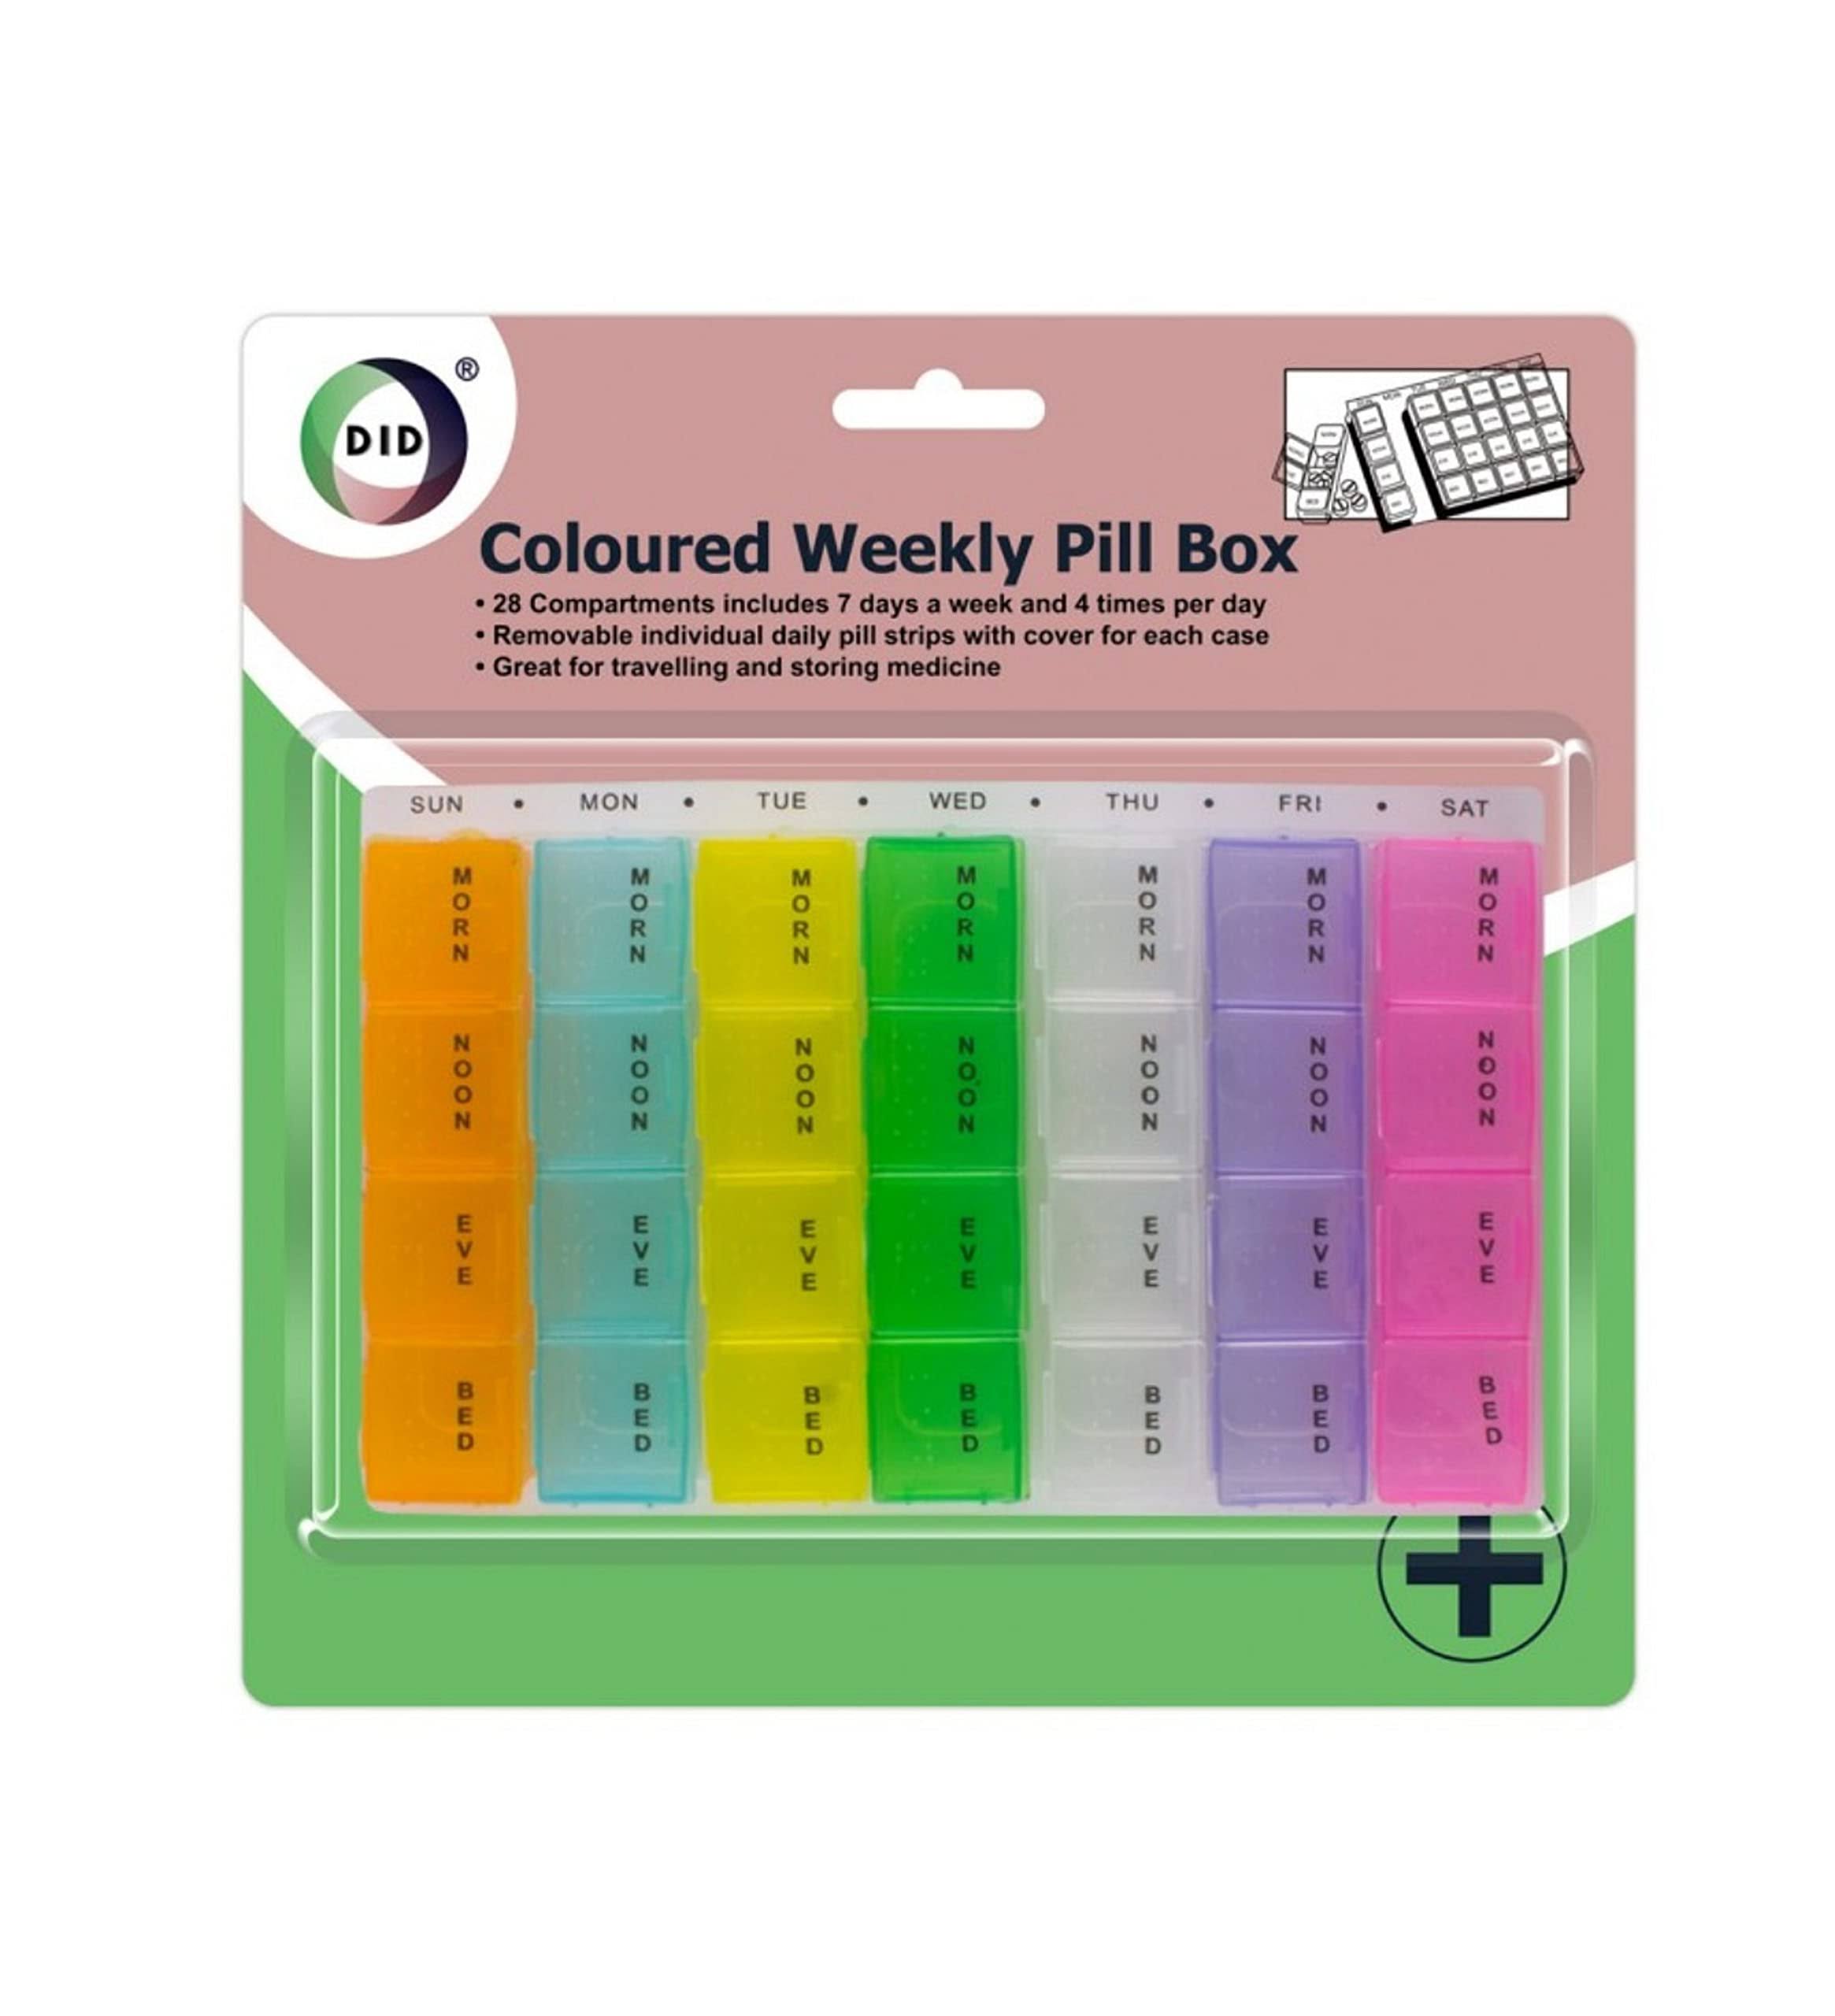 7 Day Weekly Daily Coloured Pill Box Organiser Medicine Tablet Storage Holder